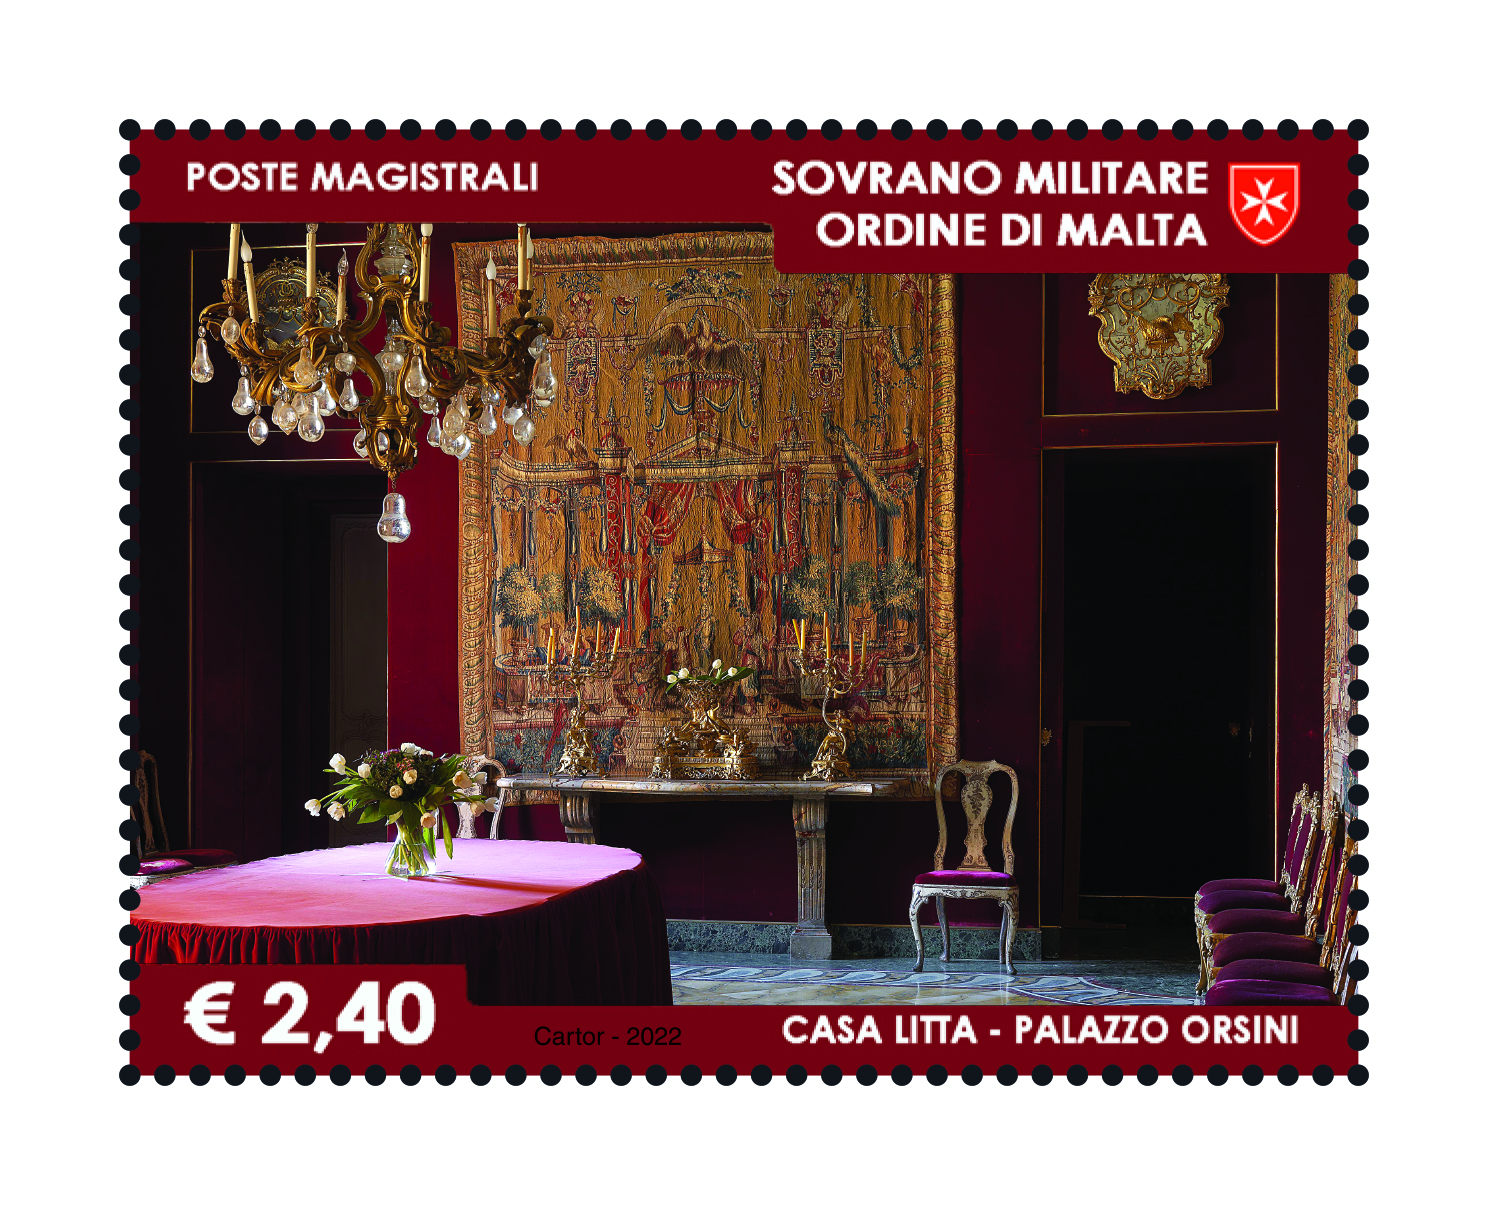 Emission of stamps dedicated to Palazzo Orsini